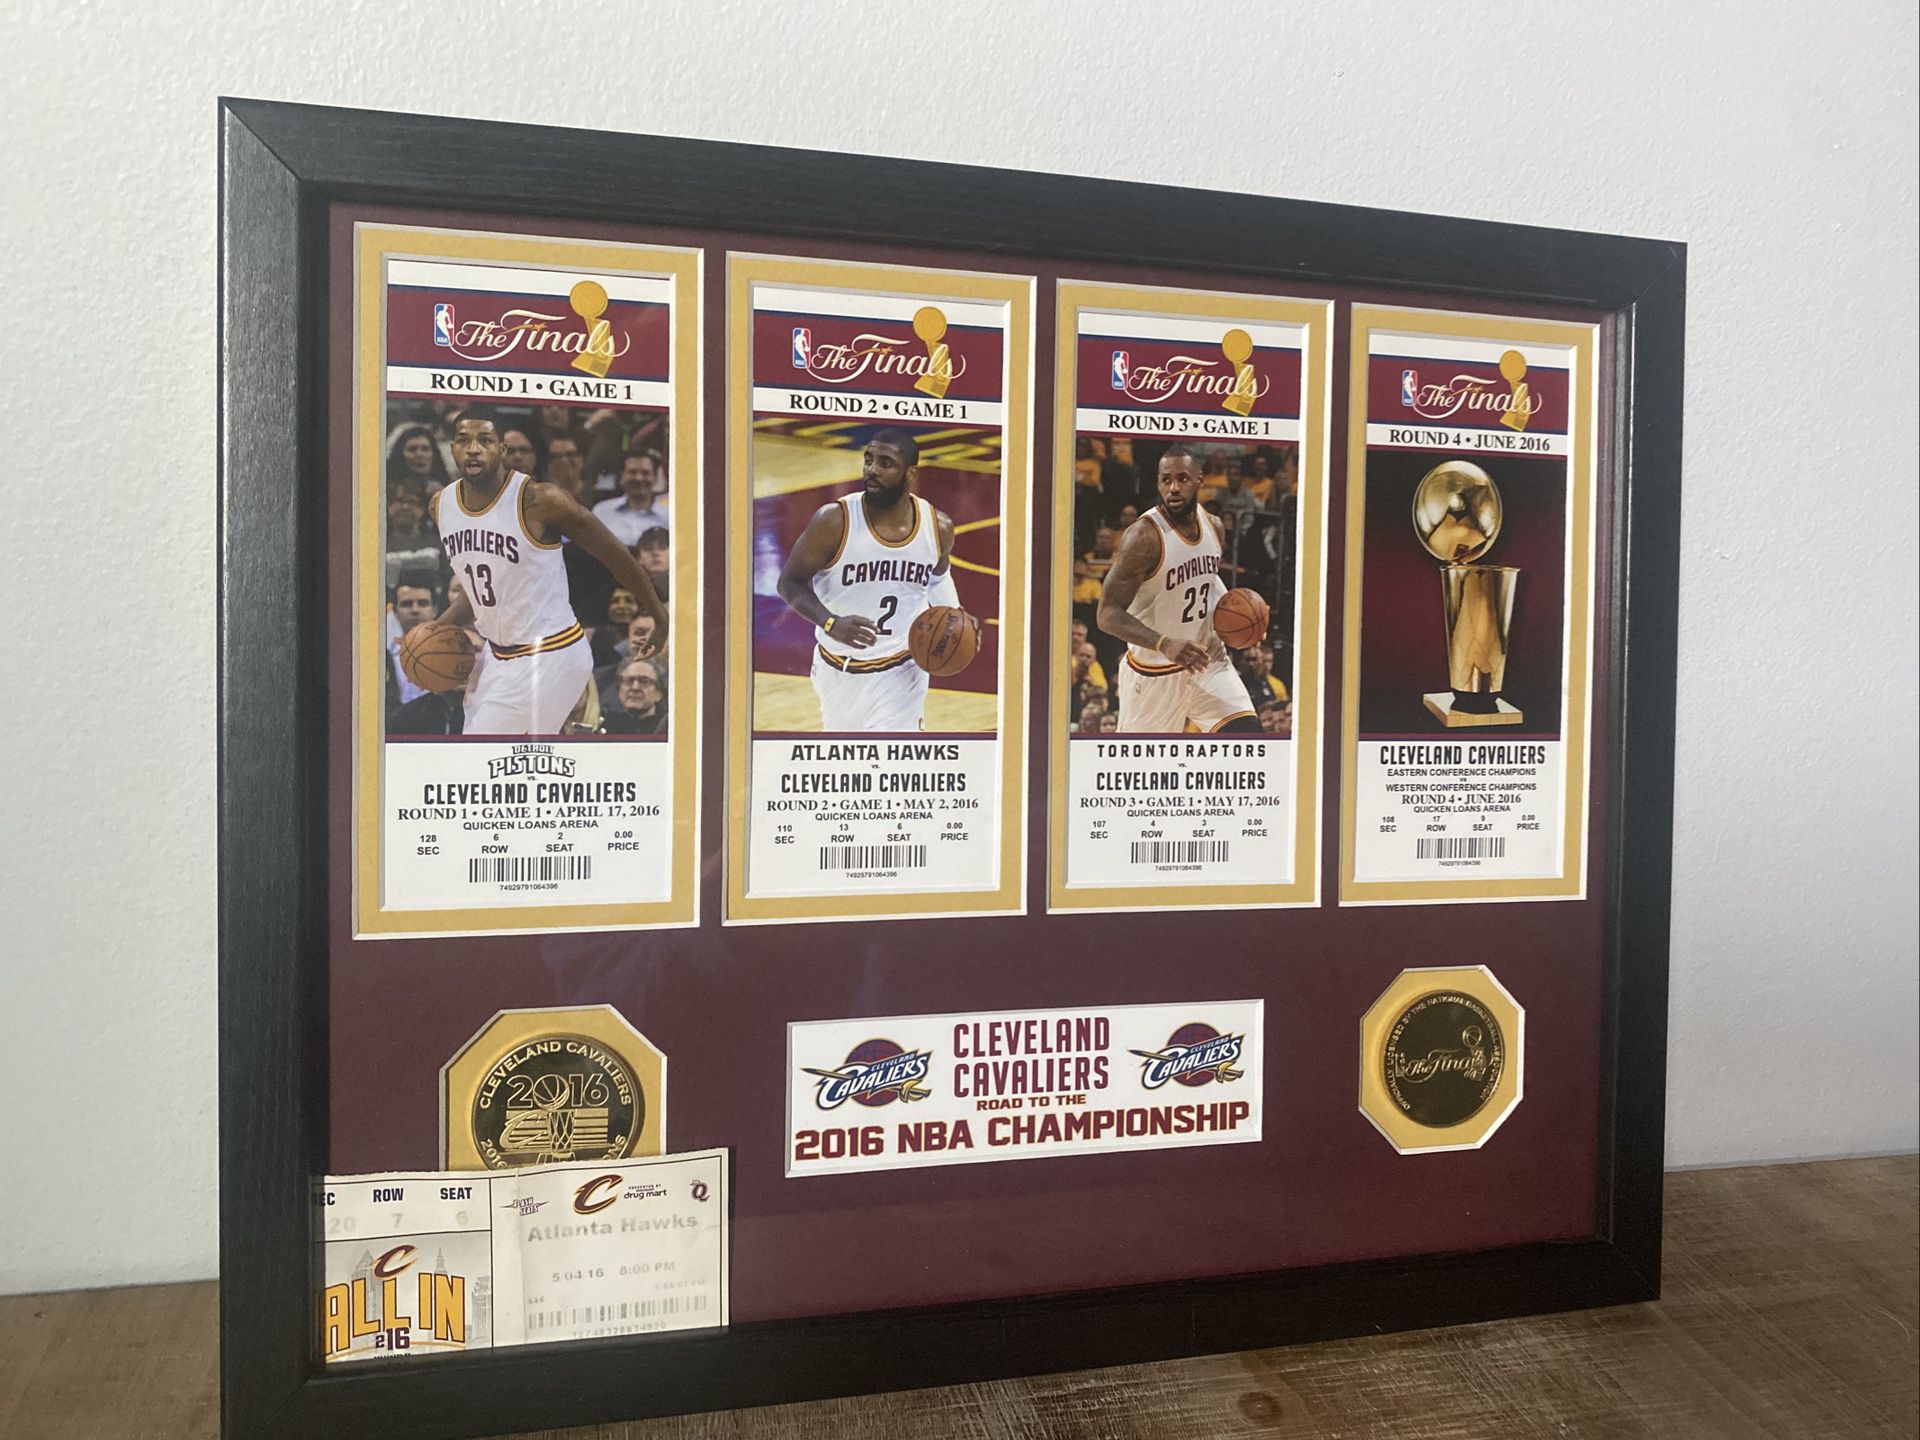 Cleveland Cavaliers 2016 NBA Champions Commemorative Tickets 